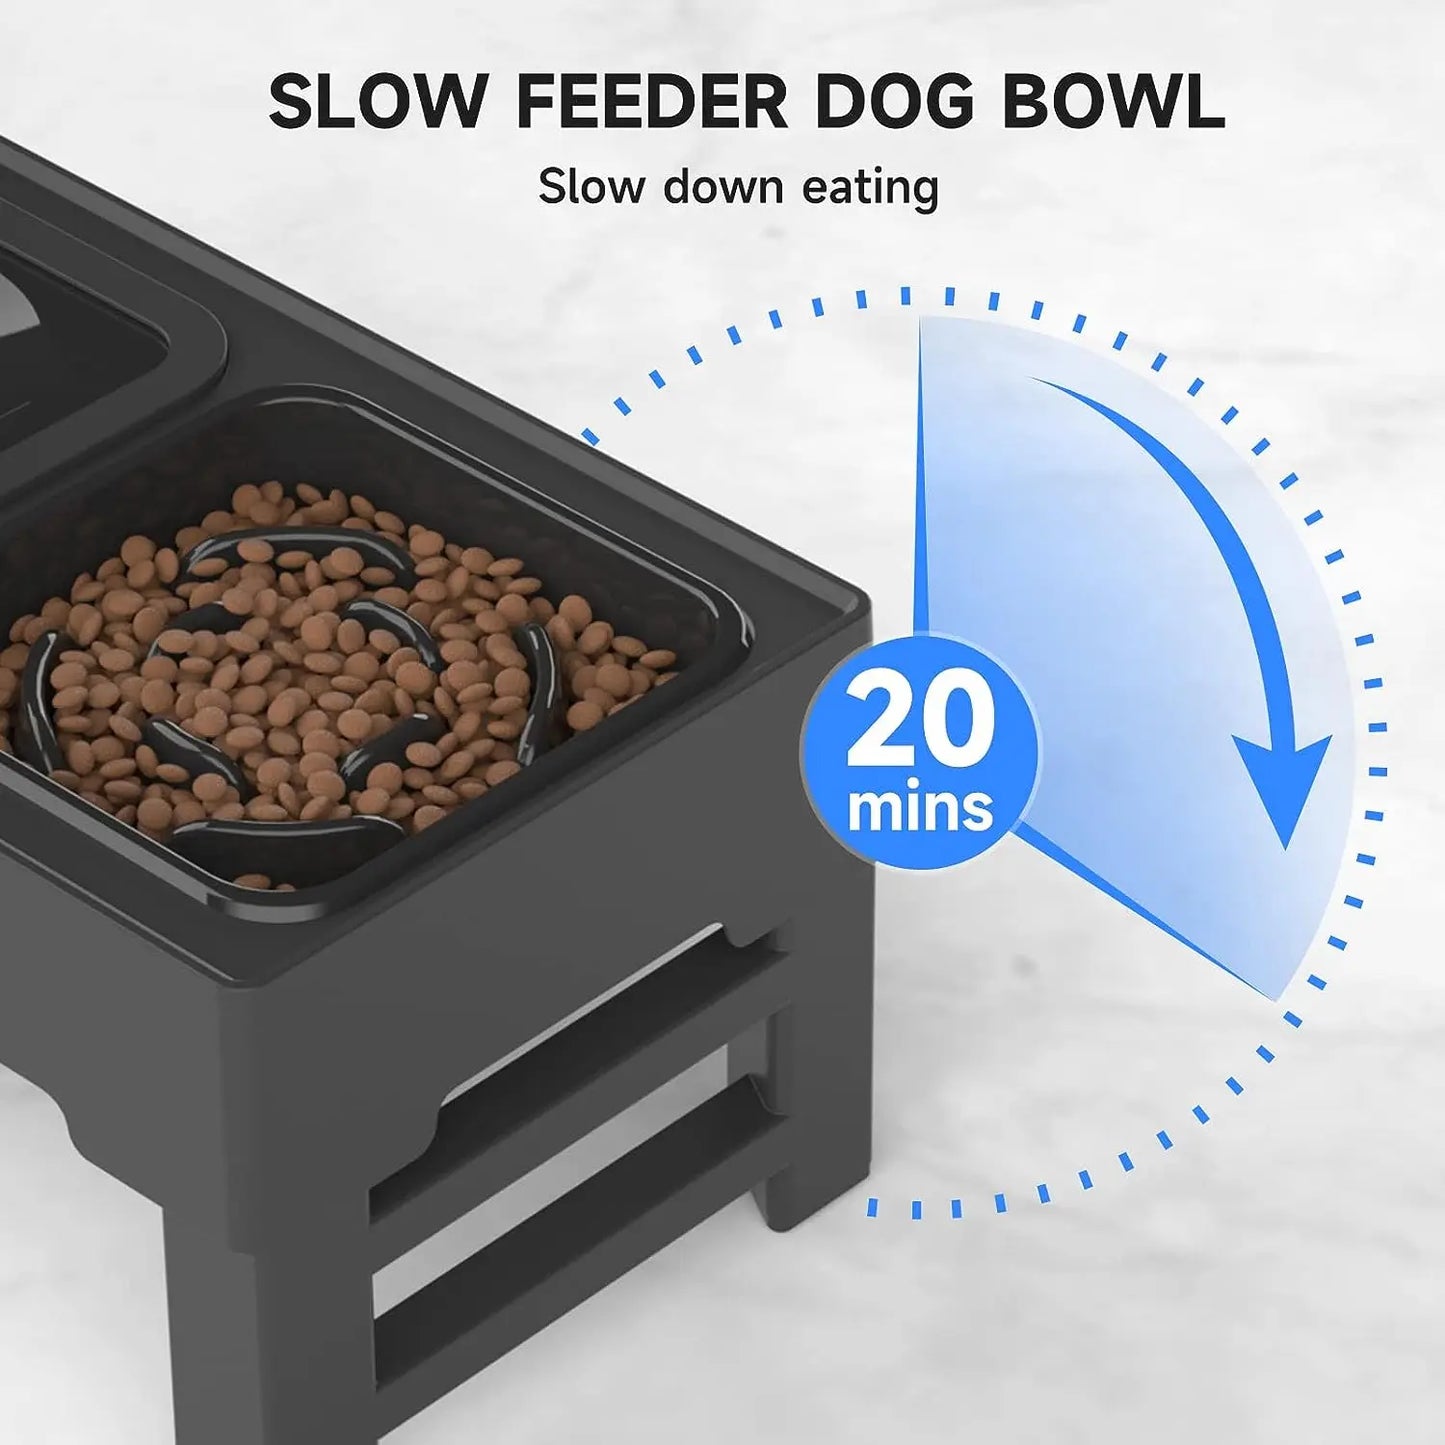 ELS PET Elevated Dog Bowls Adjustable Raised Dog Bowl with Slow Feeder Dog Bowl and Dog Water Bowl Non-Spill for Dogs and Pets